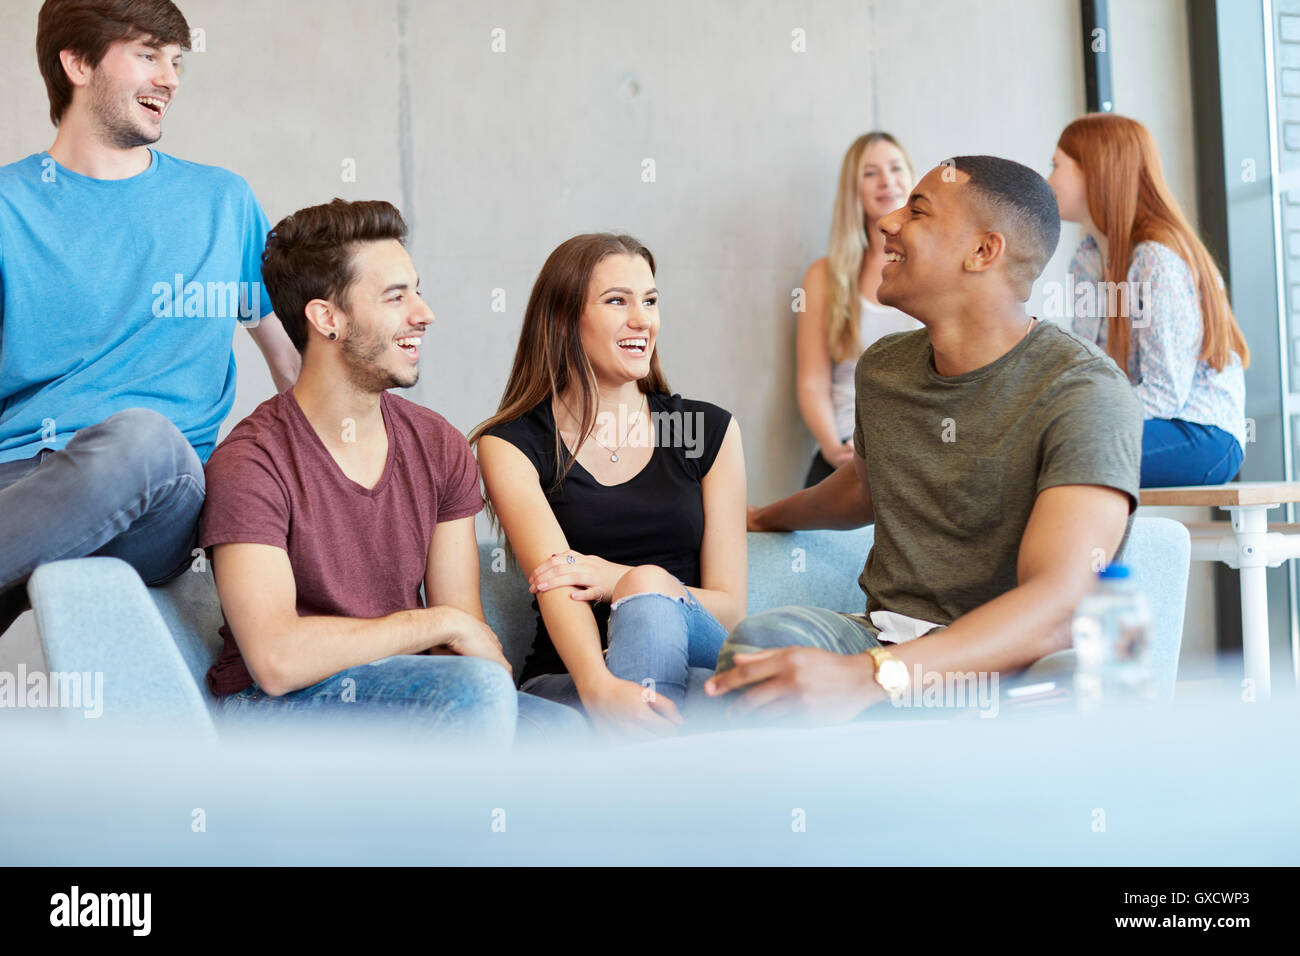 Group of young male and female students sitting on study space sofa chatting at higher education college Stock Photo